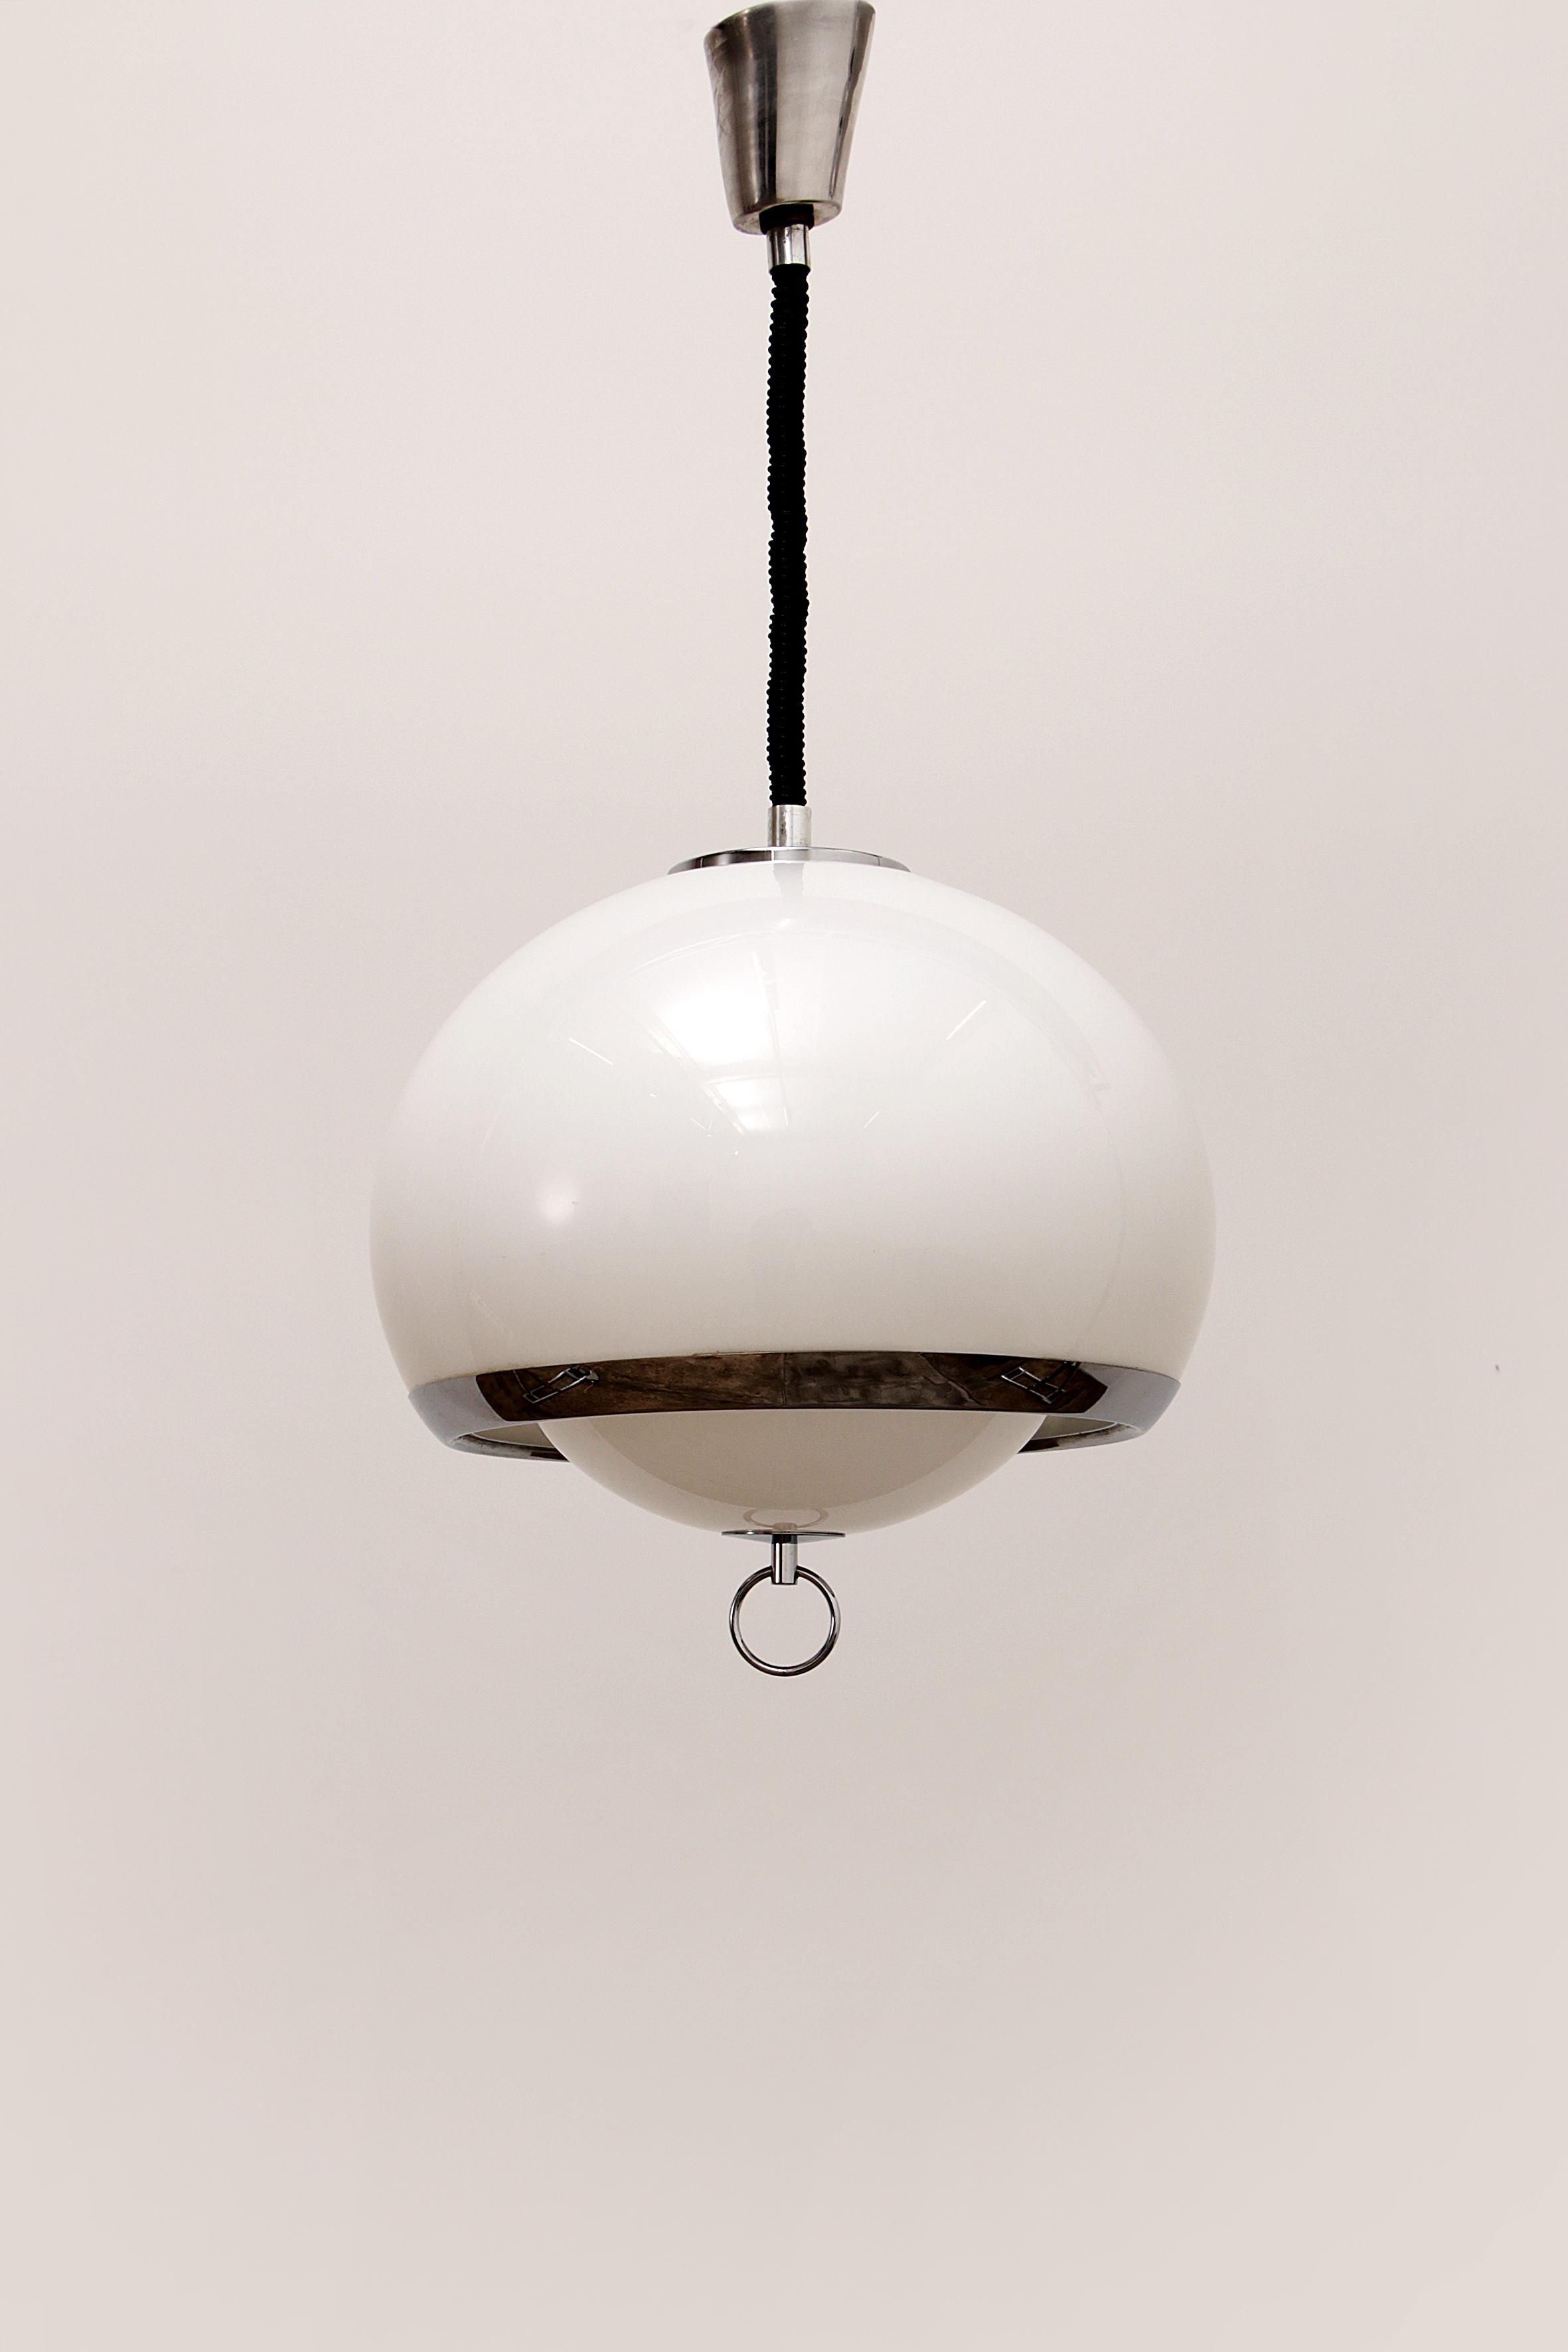 Opaline Space Age German Pendant Lamp with Harmonica Cord For Sale 10